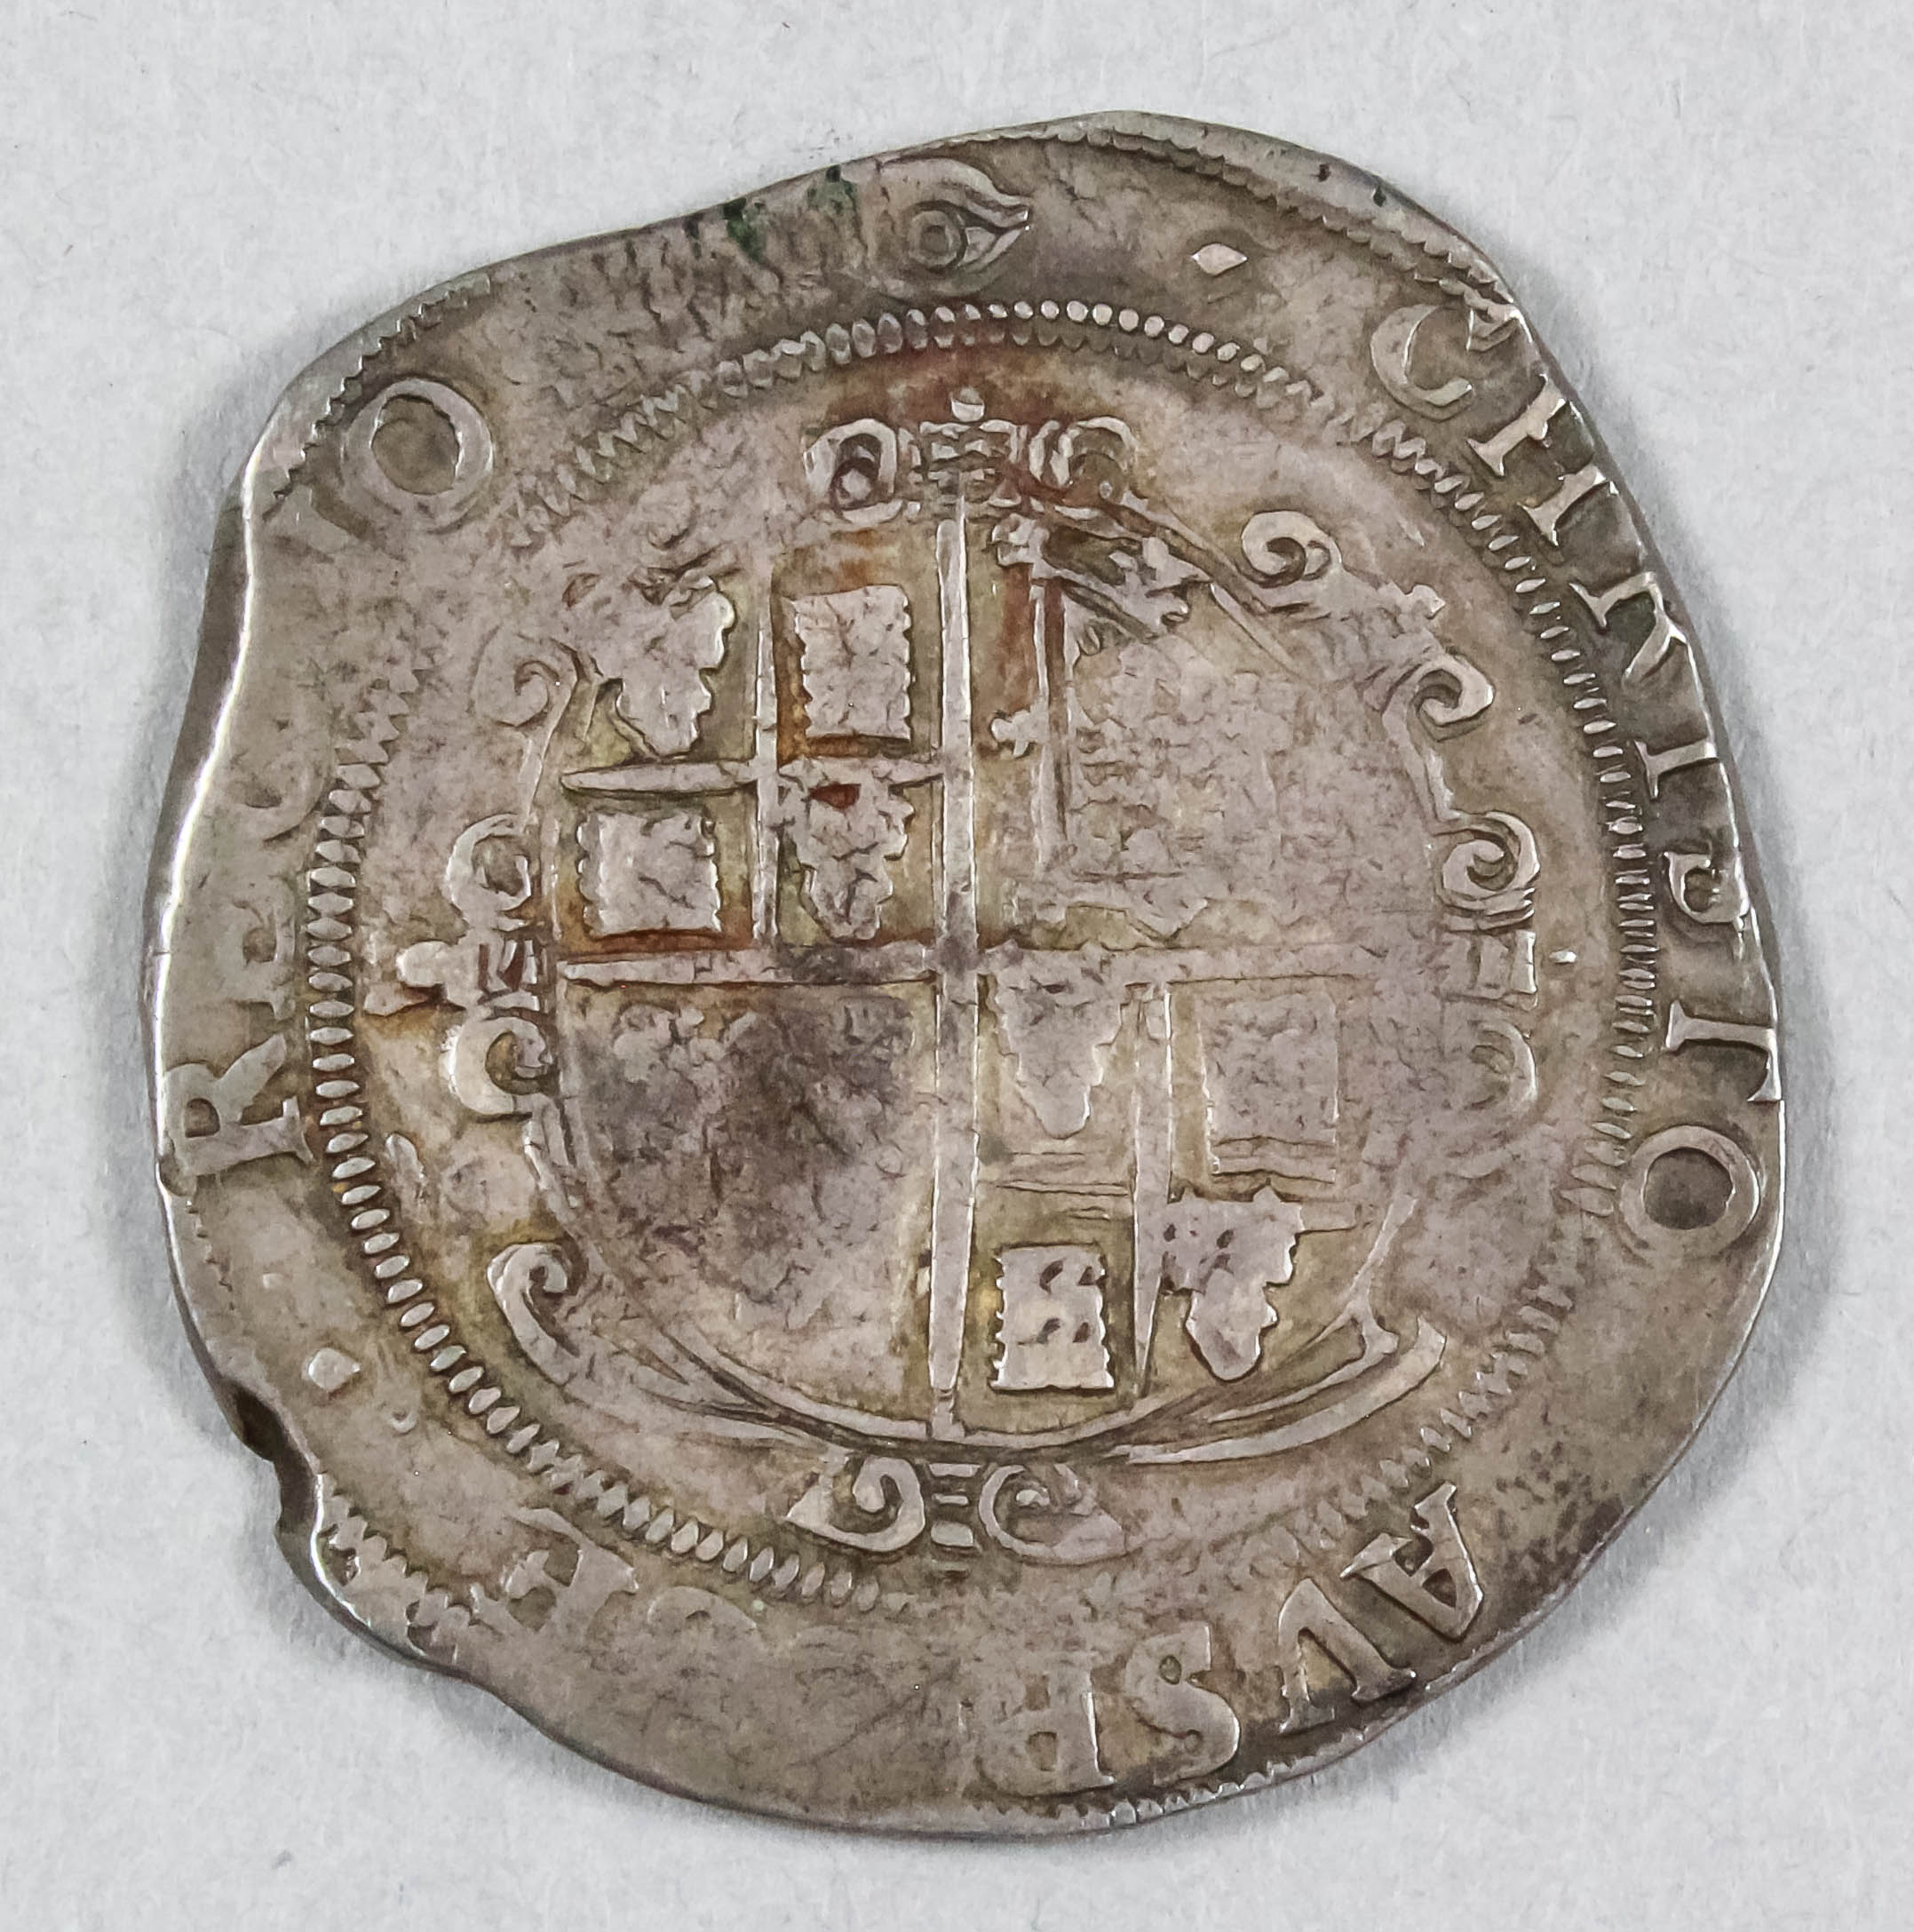 A Charles I (1625-1649) silver half Crown, mint mark Eye (1645), approximately 35mm diameter (weight